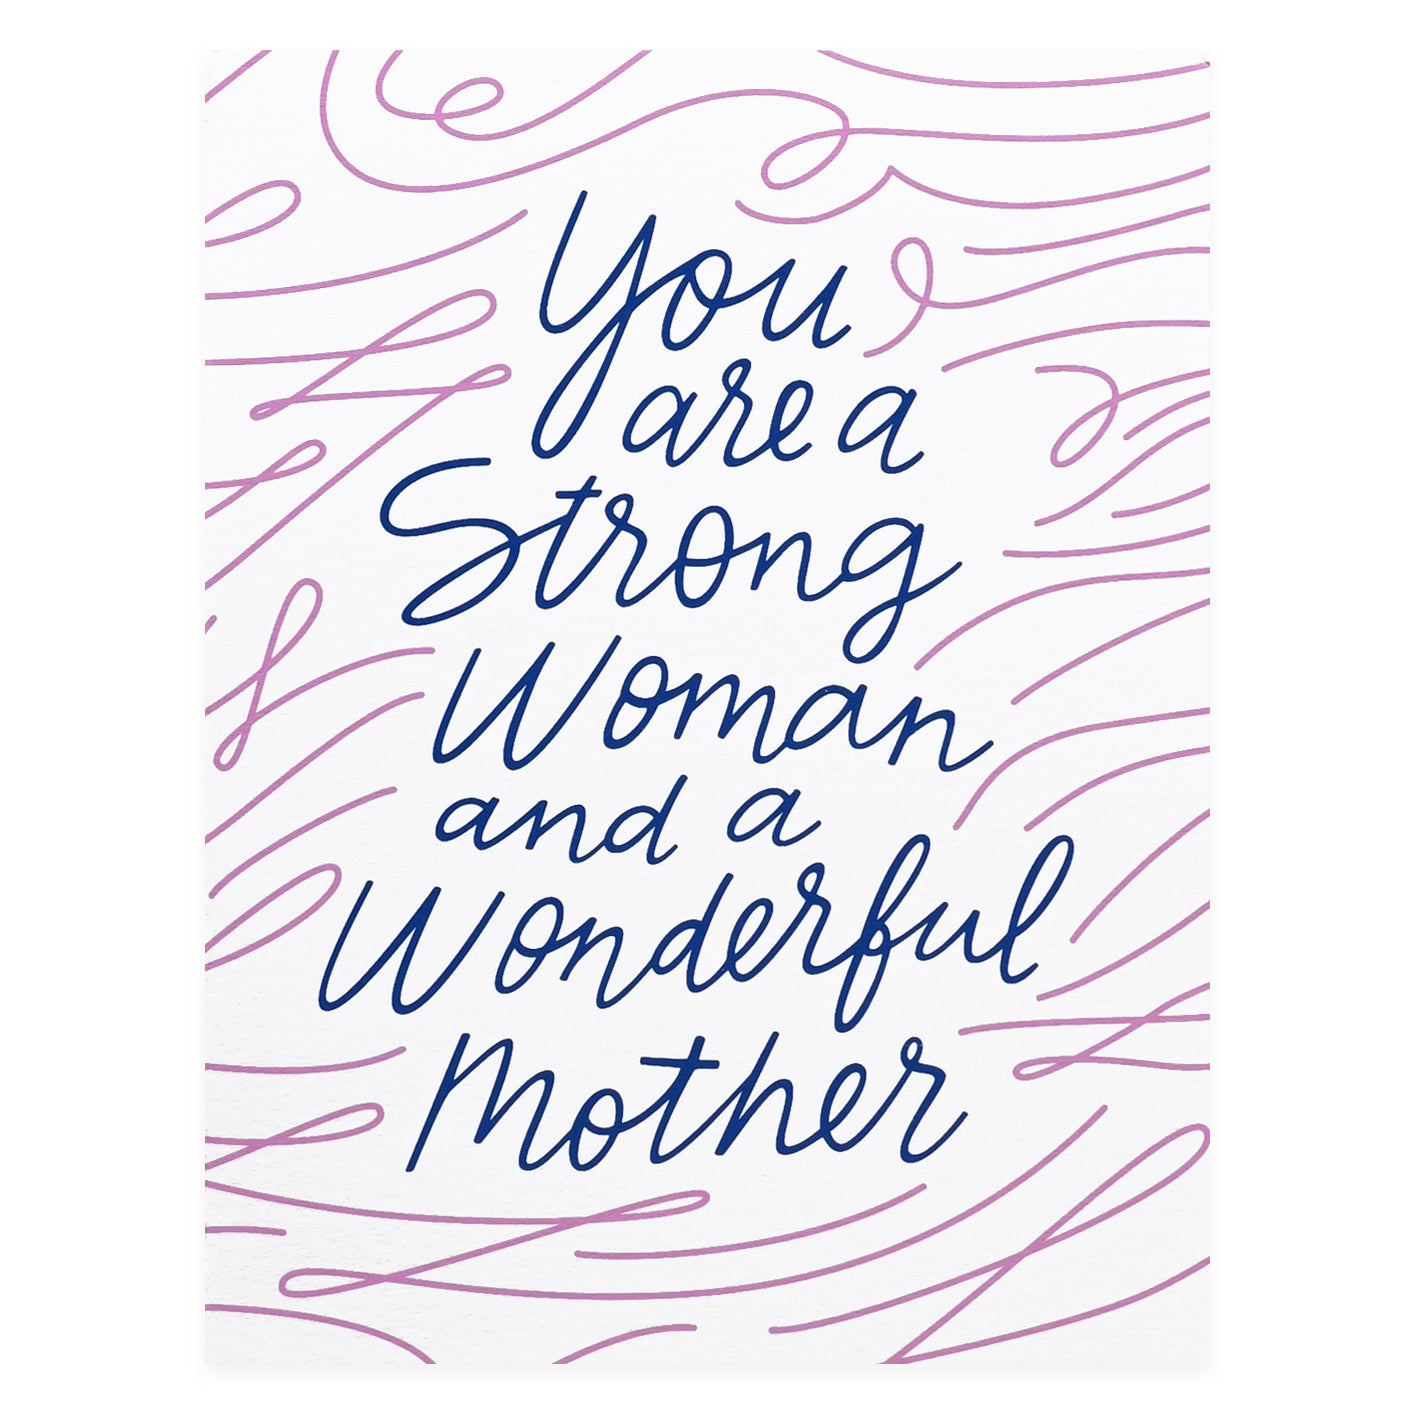 The Good Twin Strong Woman Mother's Day Card 